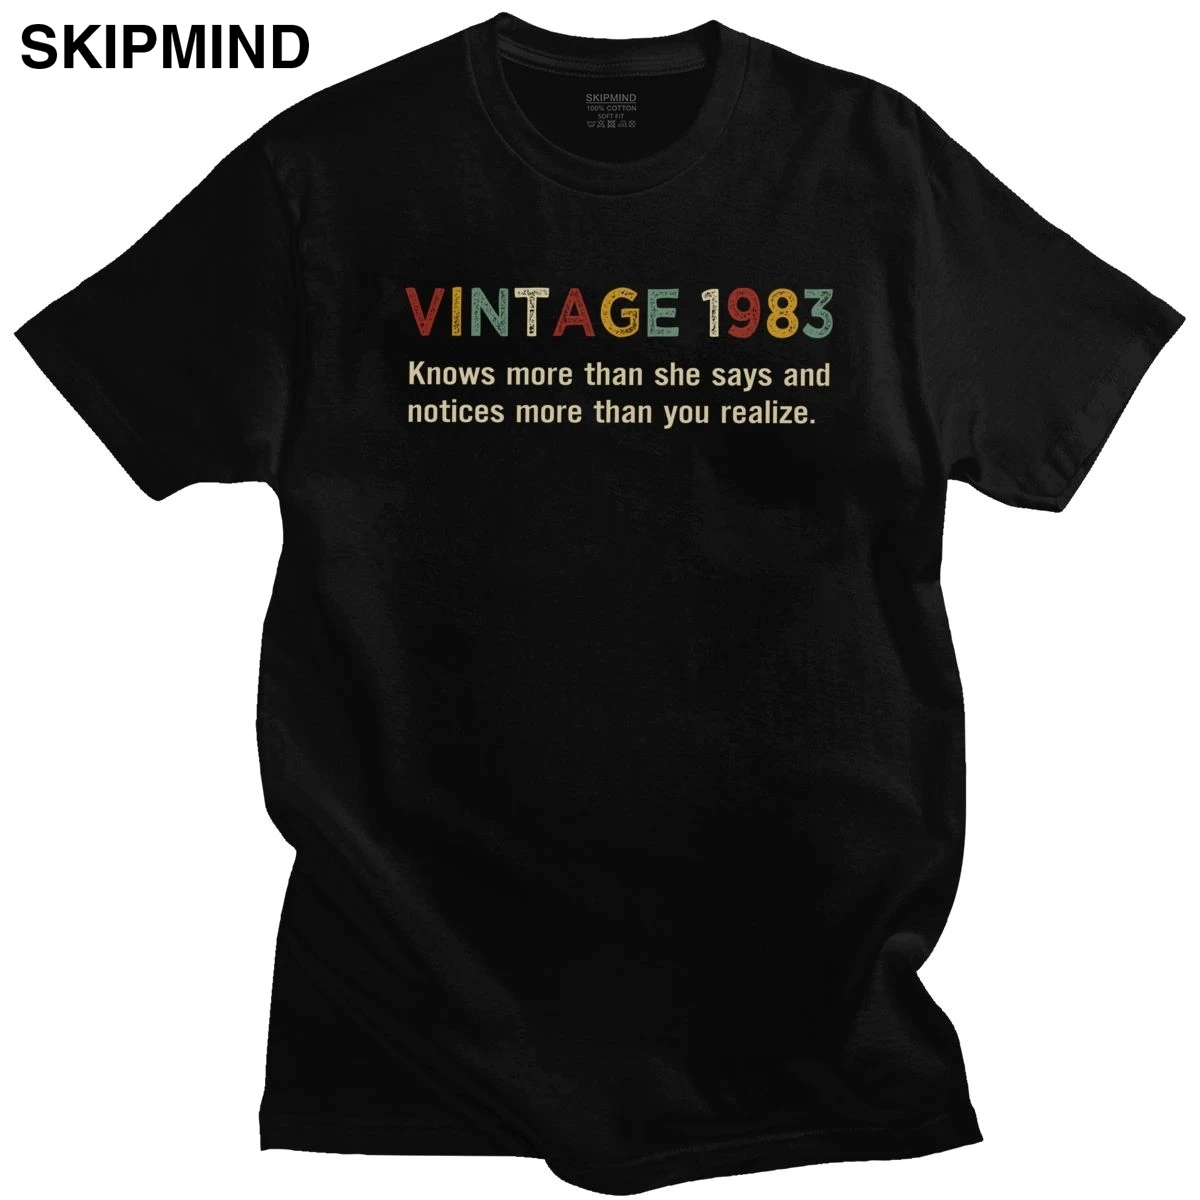 

Funny Men's Vintage 1983 T-Shirt Short Sleeved Cotton Tshirt Casual Knows More Than She Says 37th Birthday Tee Shirt Clothes